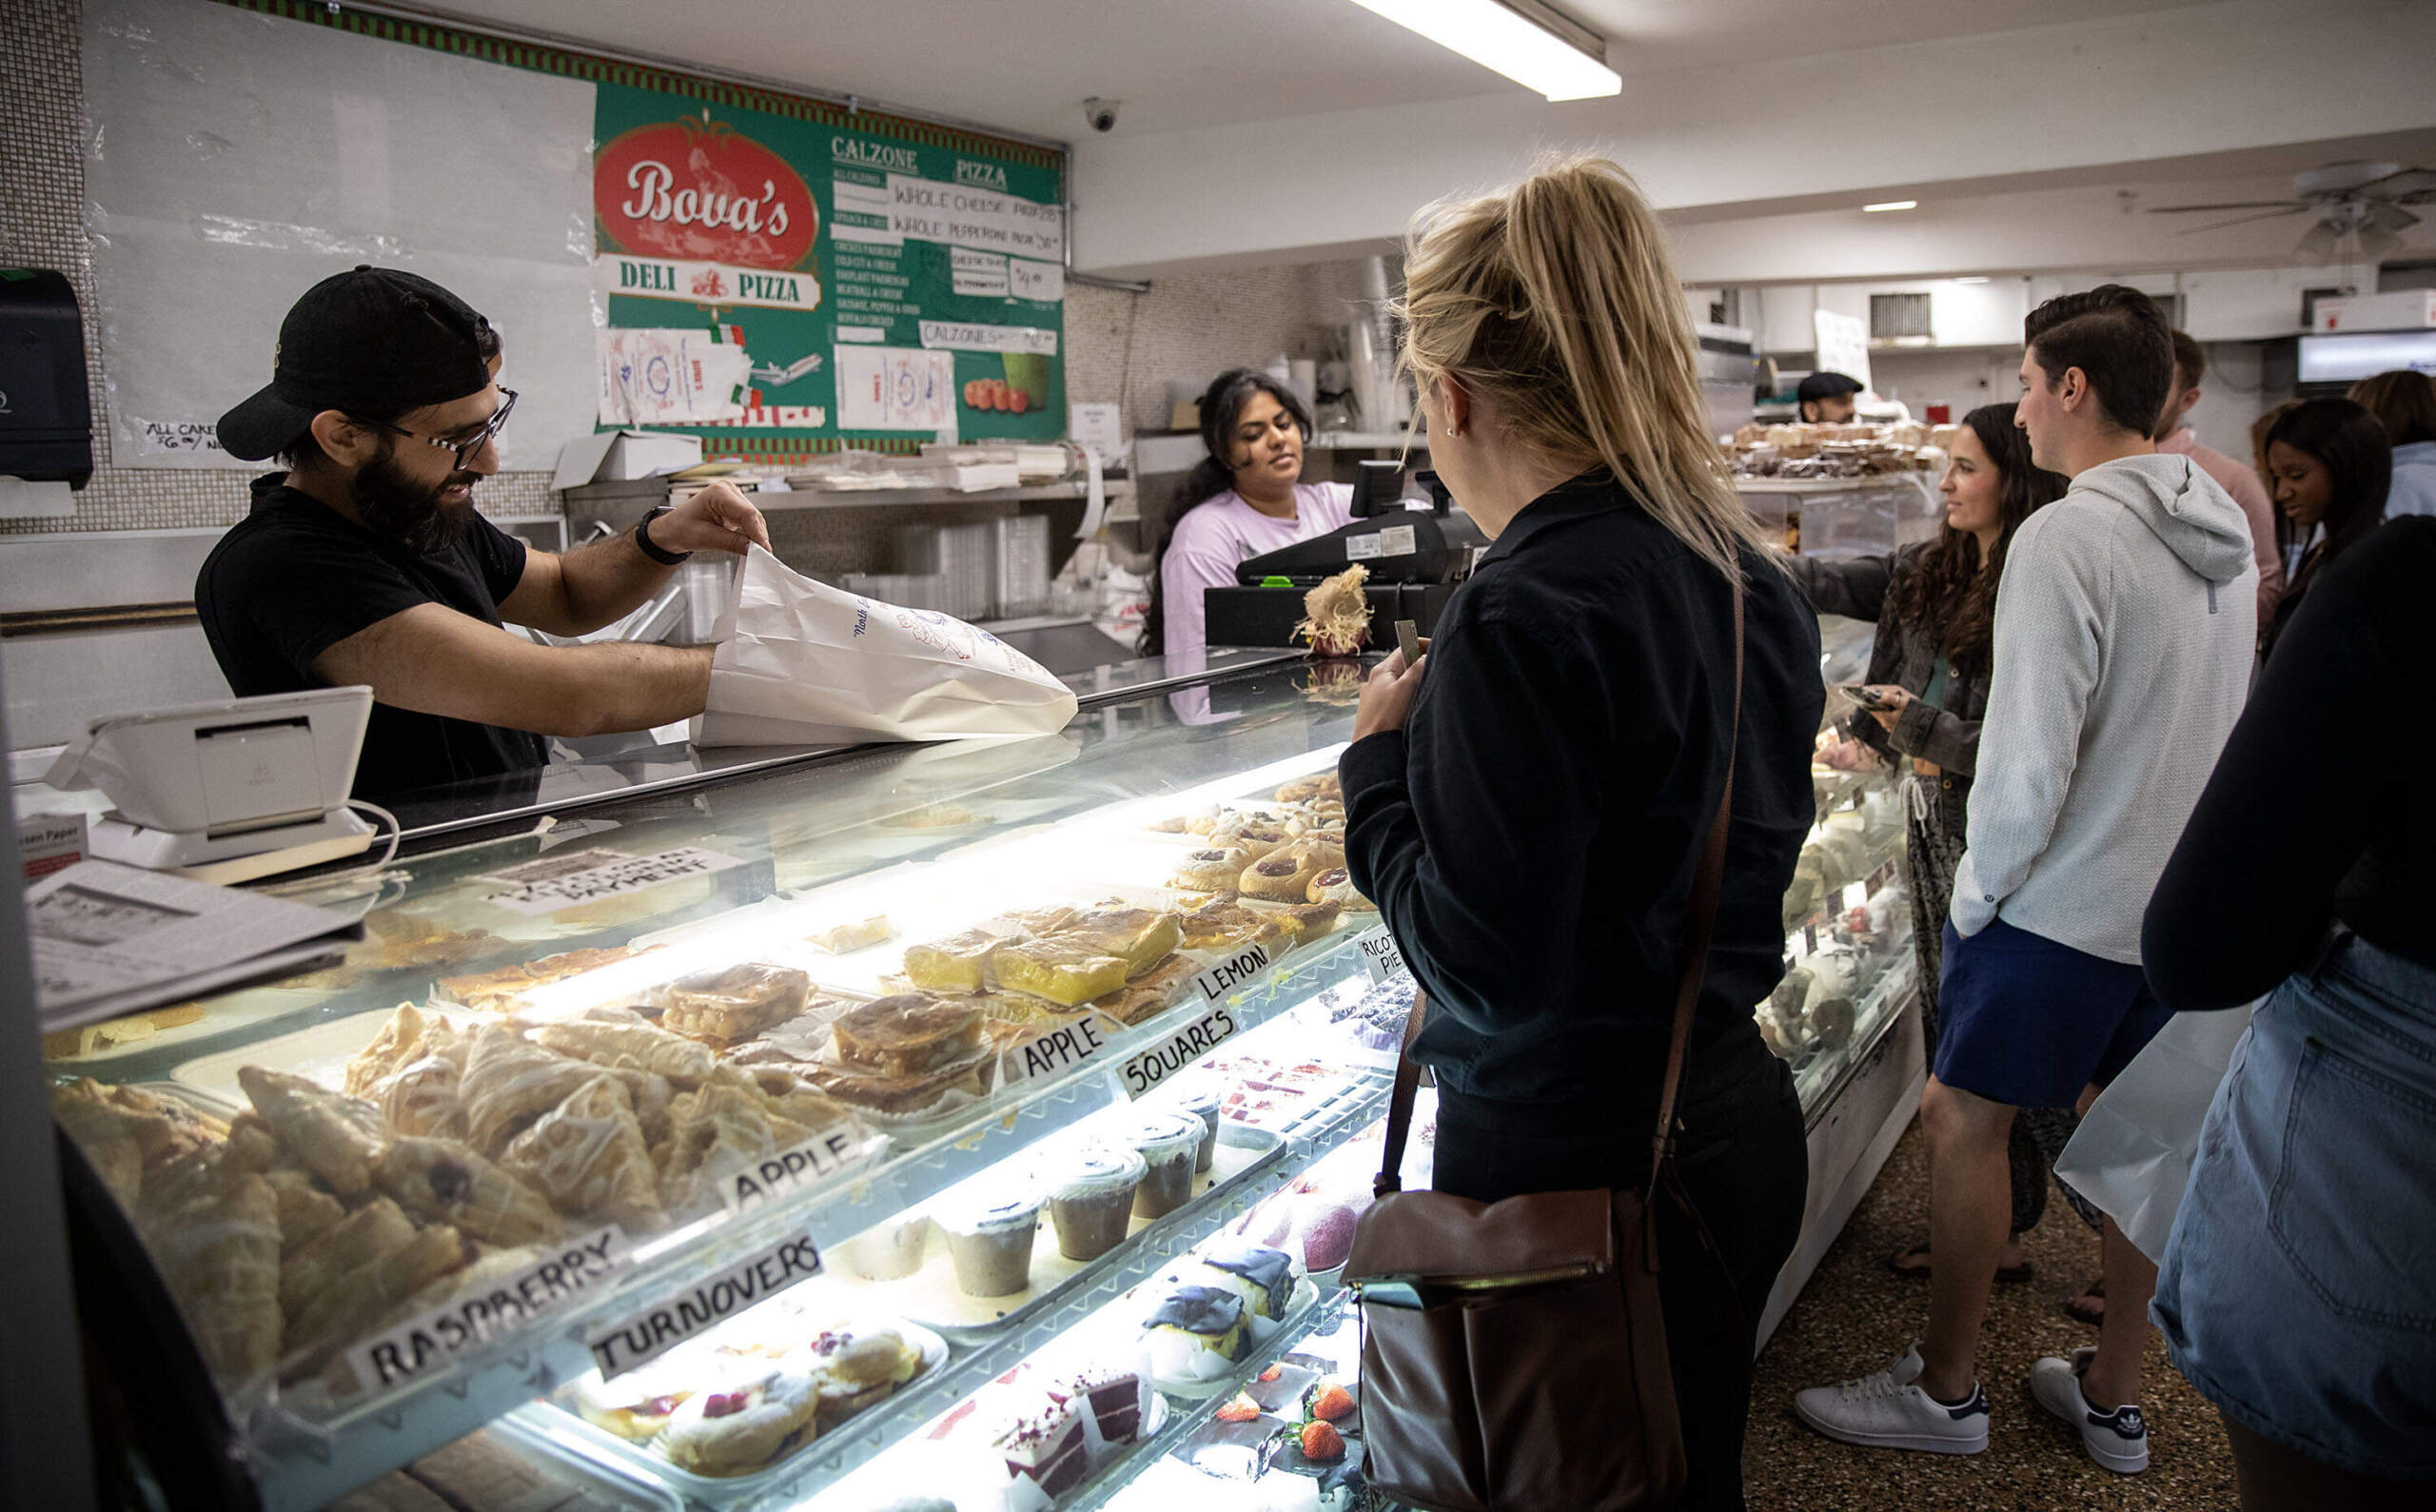 Customers order pastries at Bova's Bakery in Boston's North End. (Robin Lubbock/WBUR)